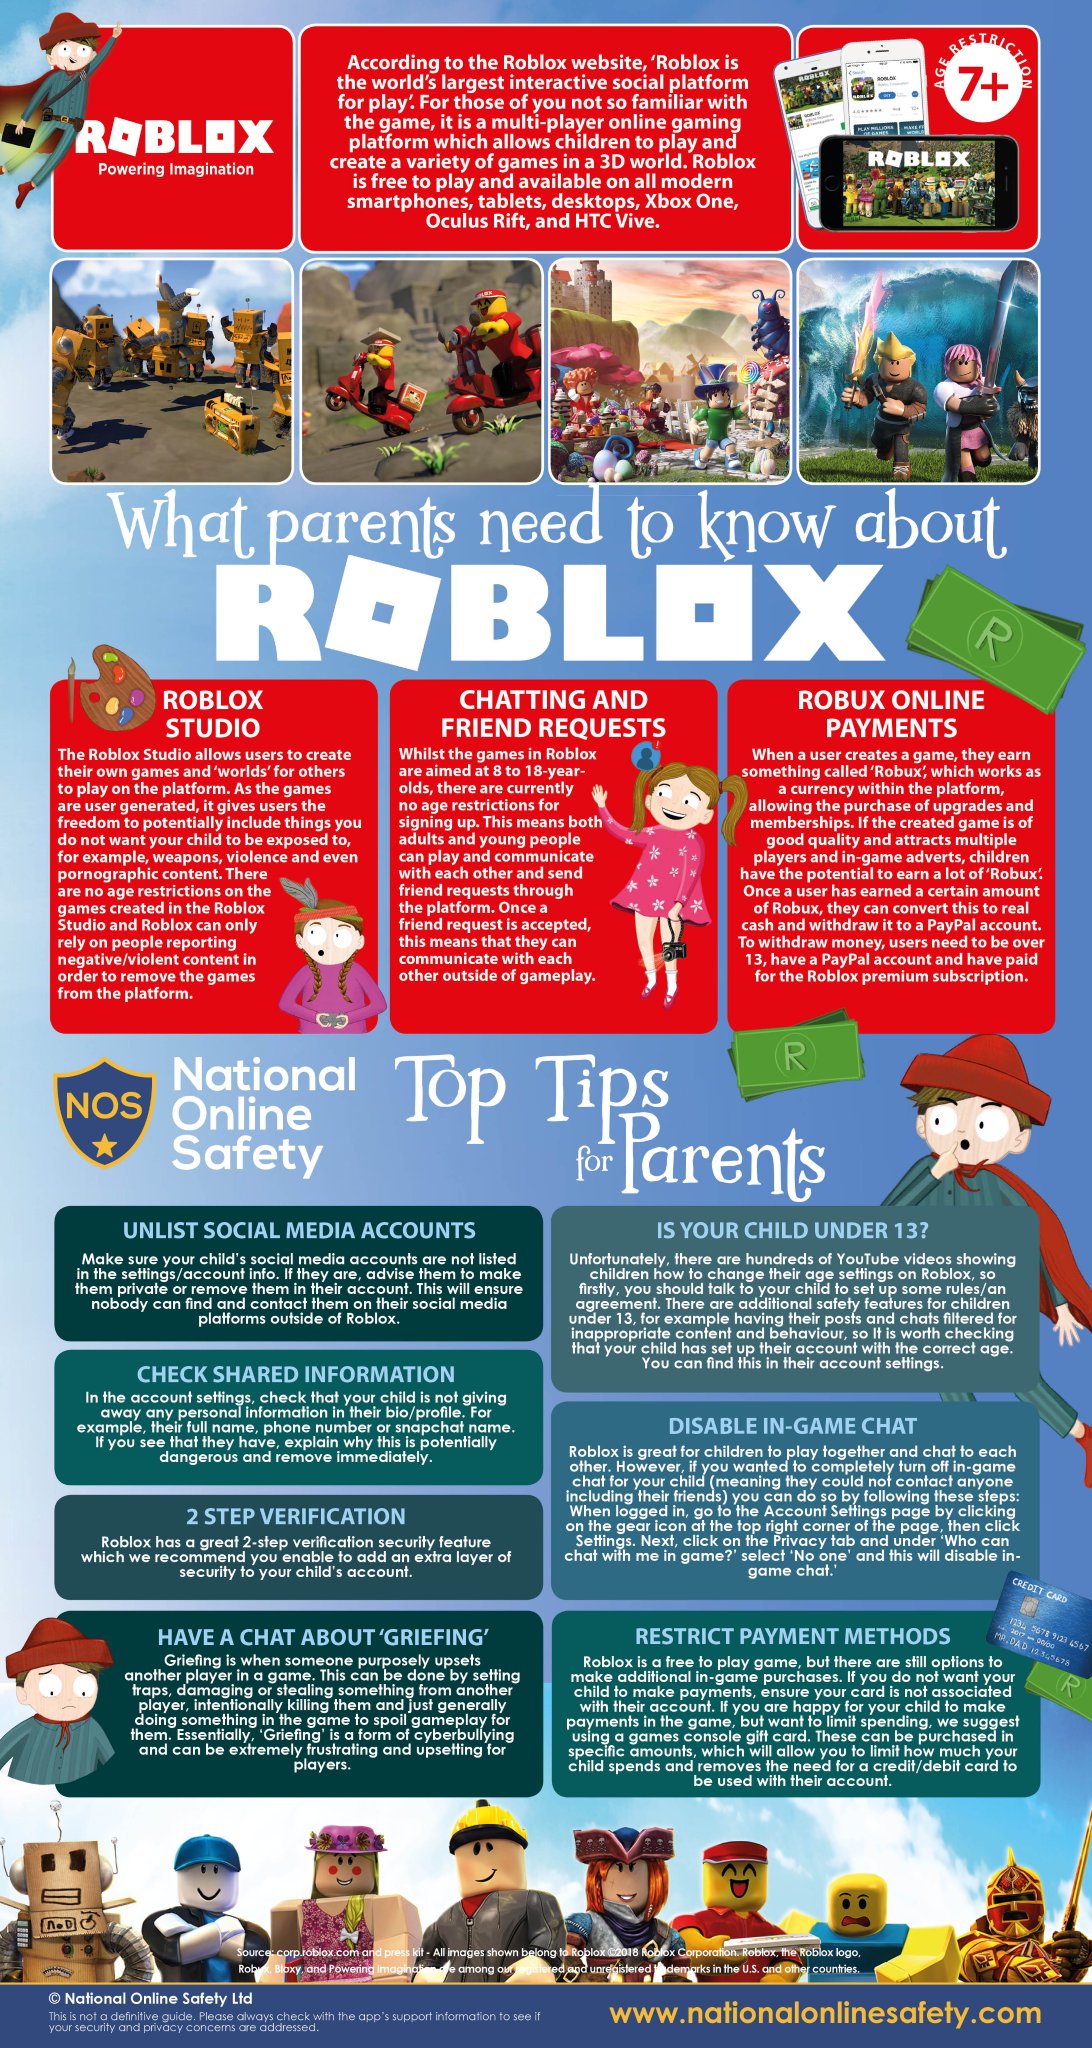 Is Roblox safe for kids? Parents' guide to Roblox